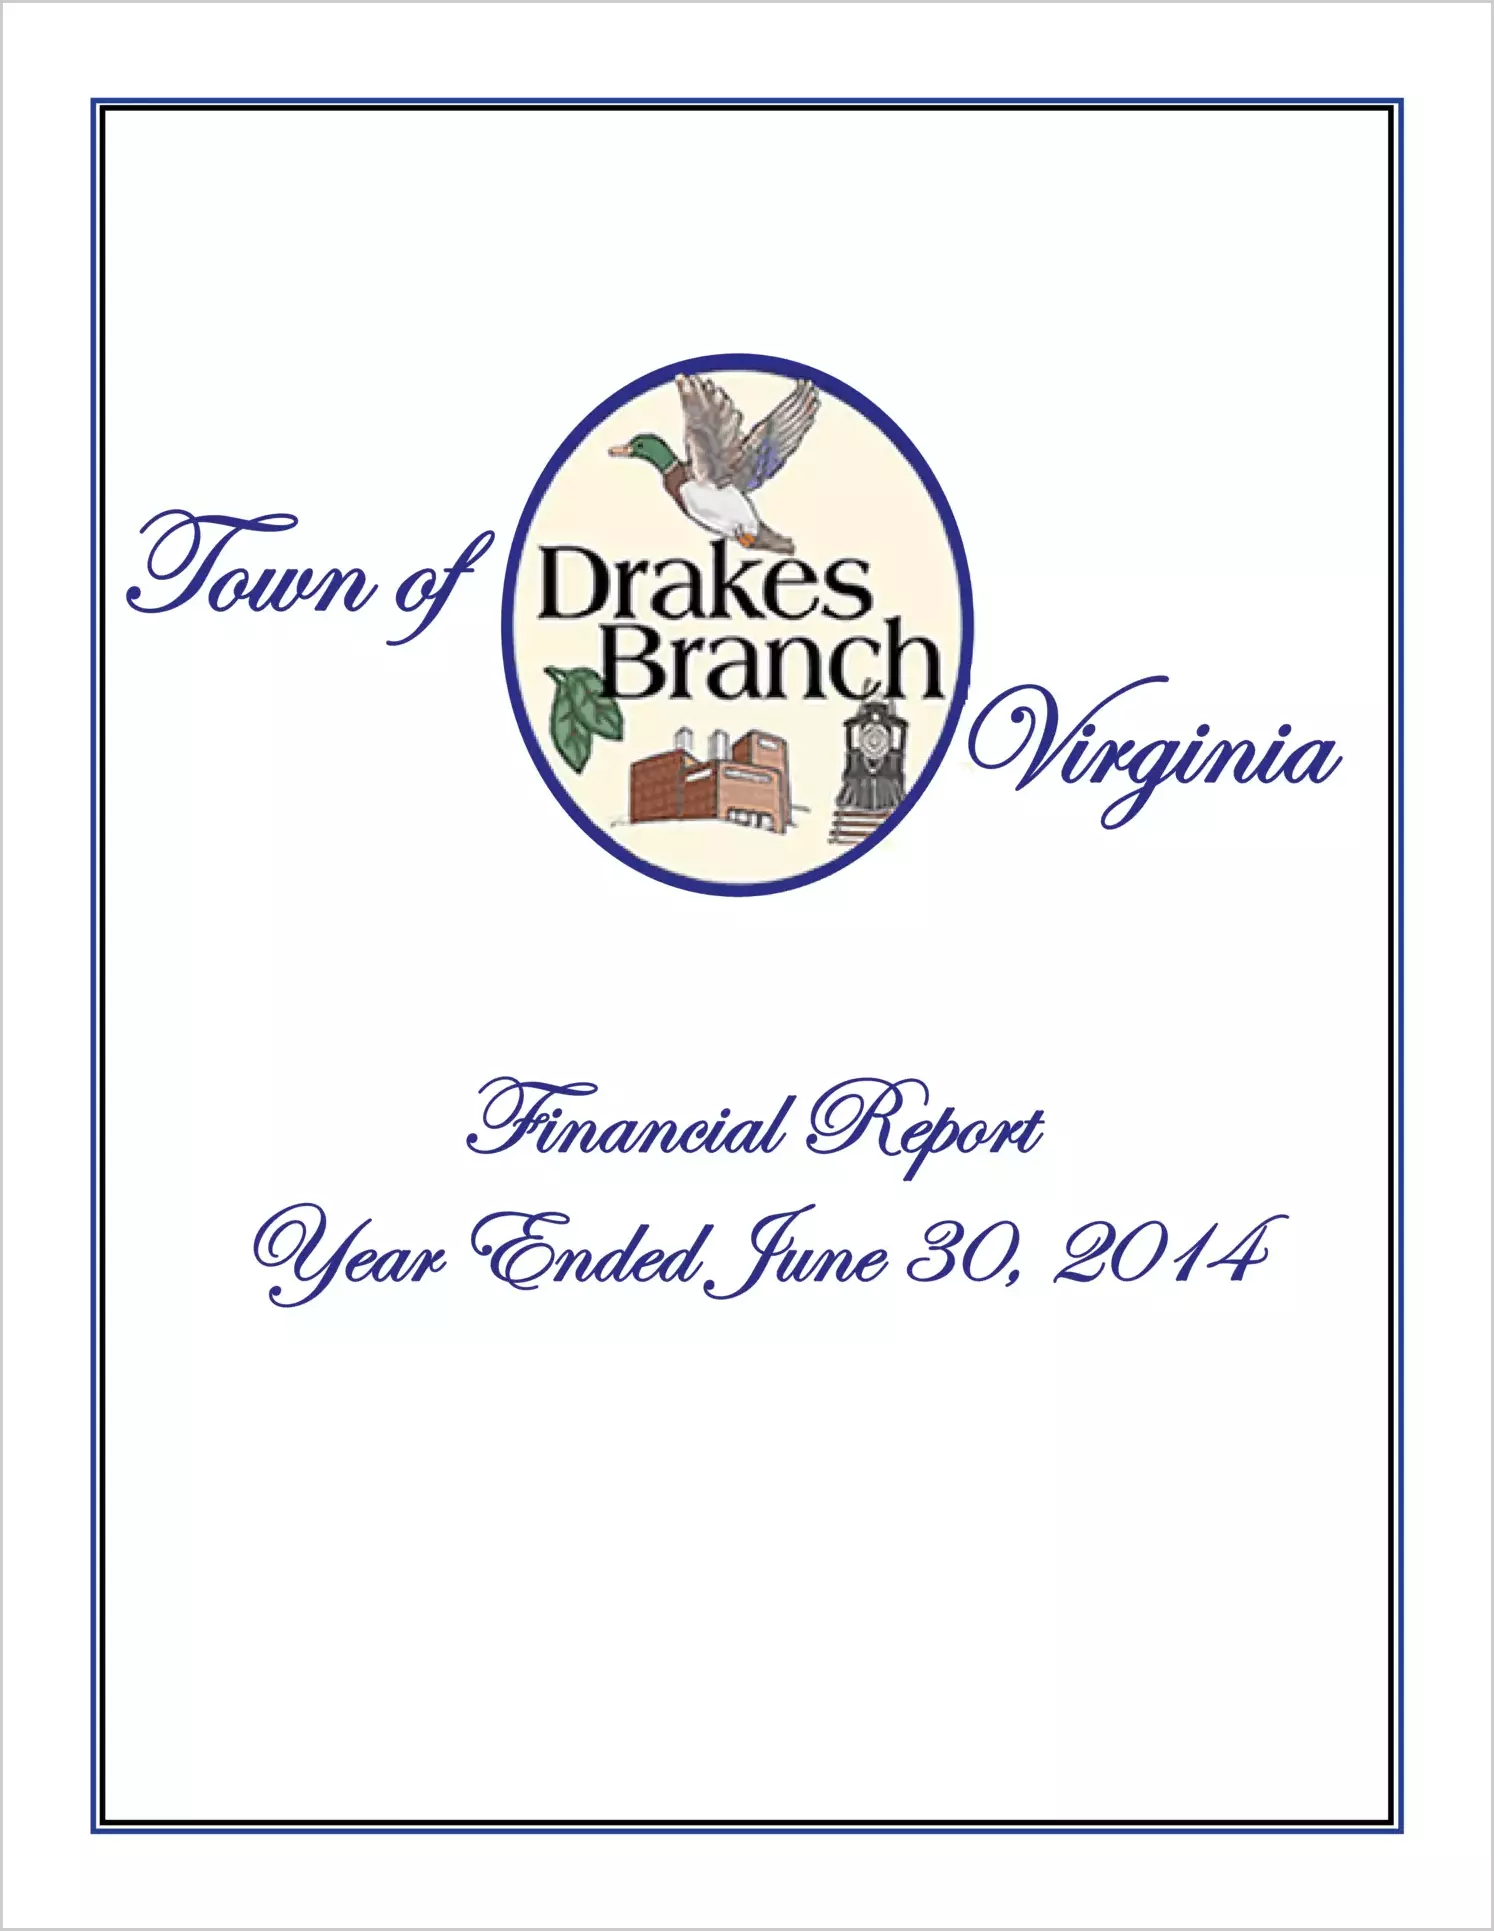 2014 Annual Financial Report for Town of Drakes Branch